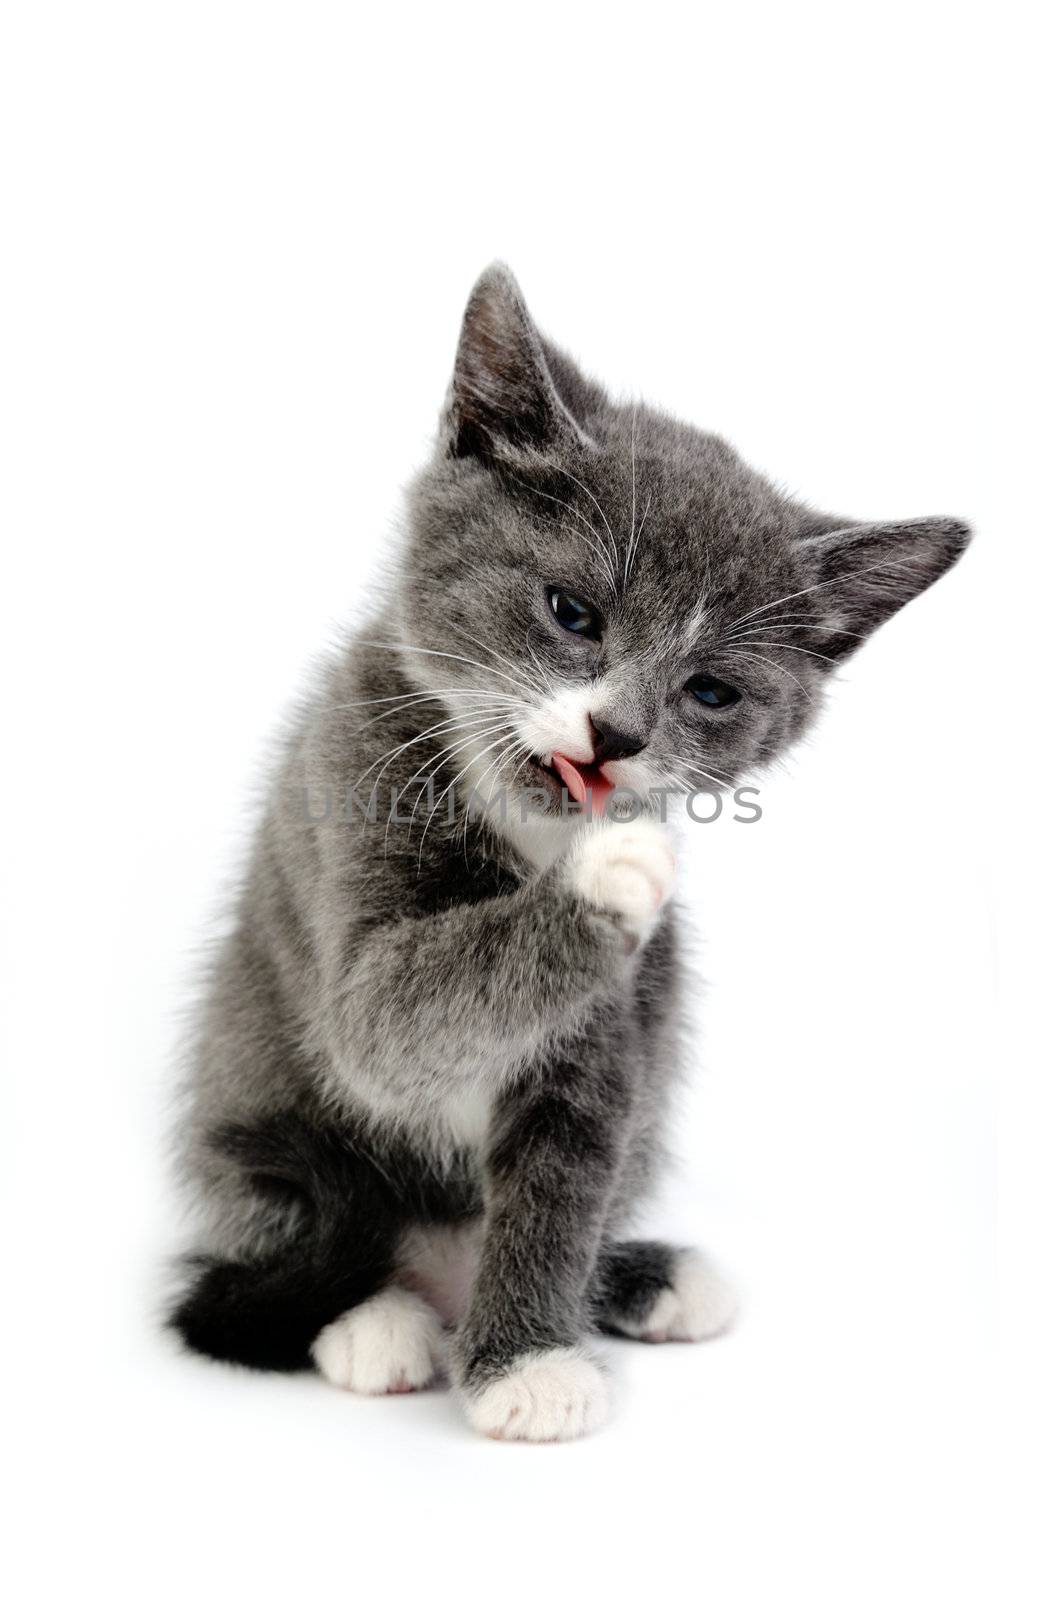 An image of a little cat licking its paw